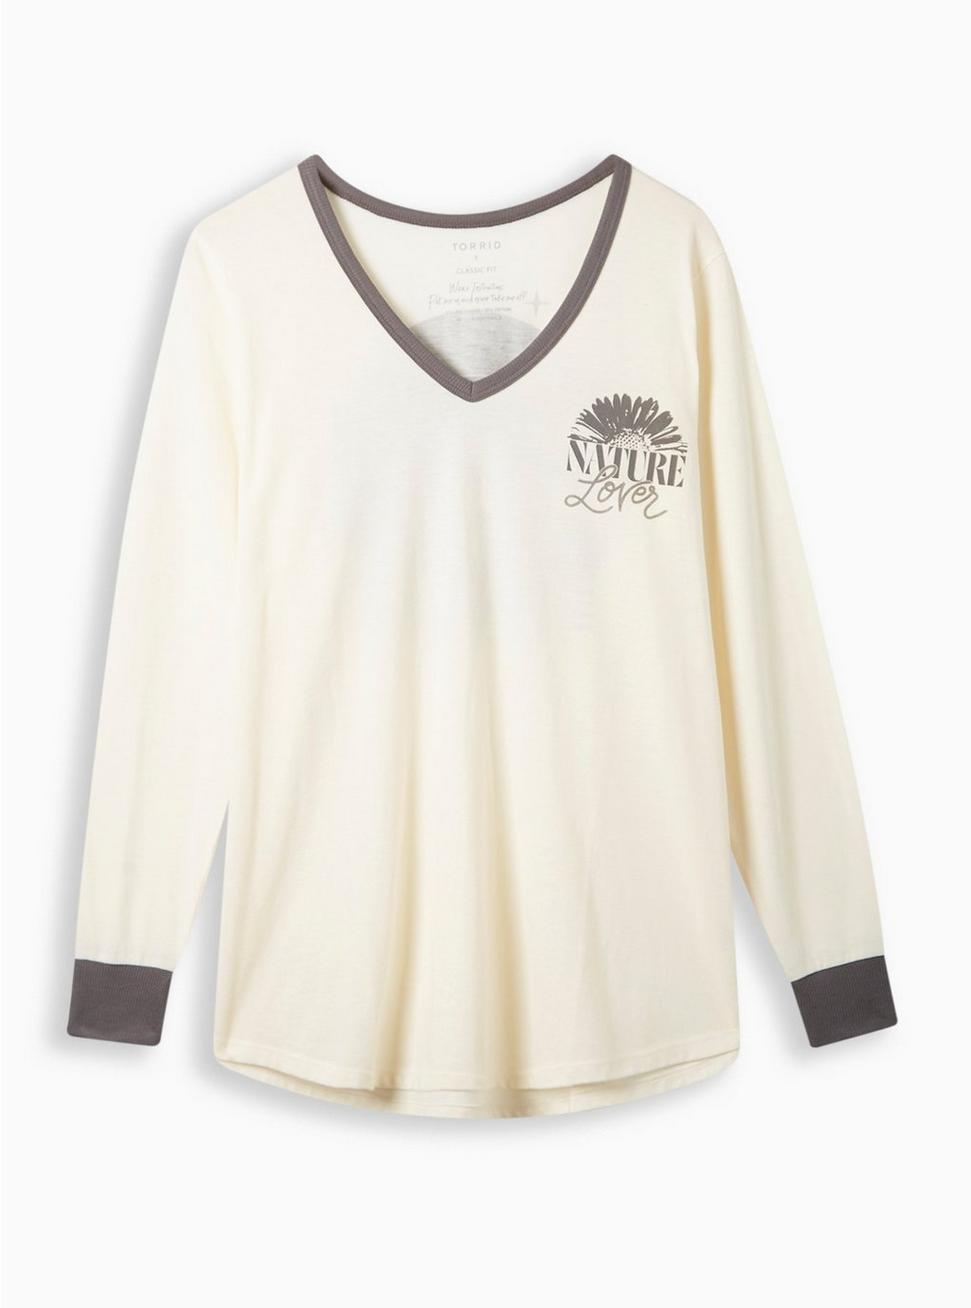 Nature Fit Classic Fit Signature Jersey V-Neck Long Sleeve Tee, CREAM, hi-res